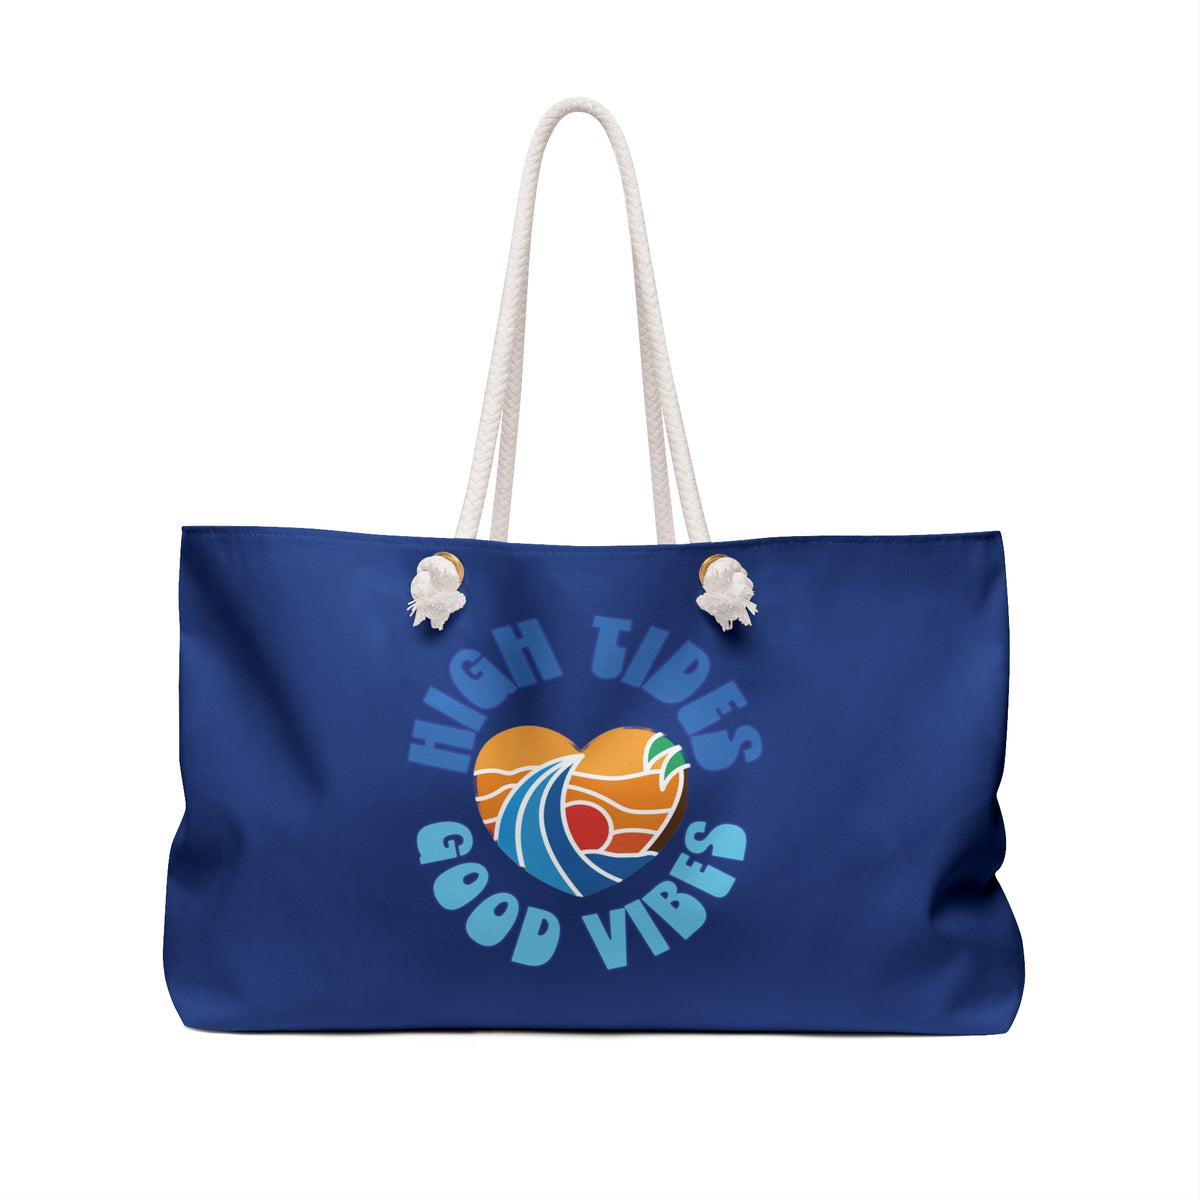 High Tides Good Vibes Tote Bag